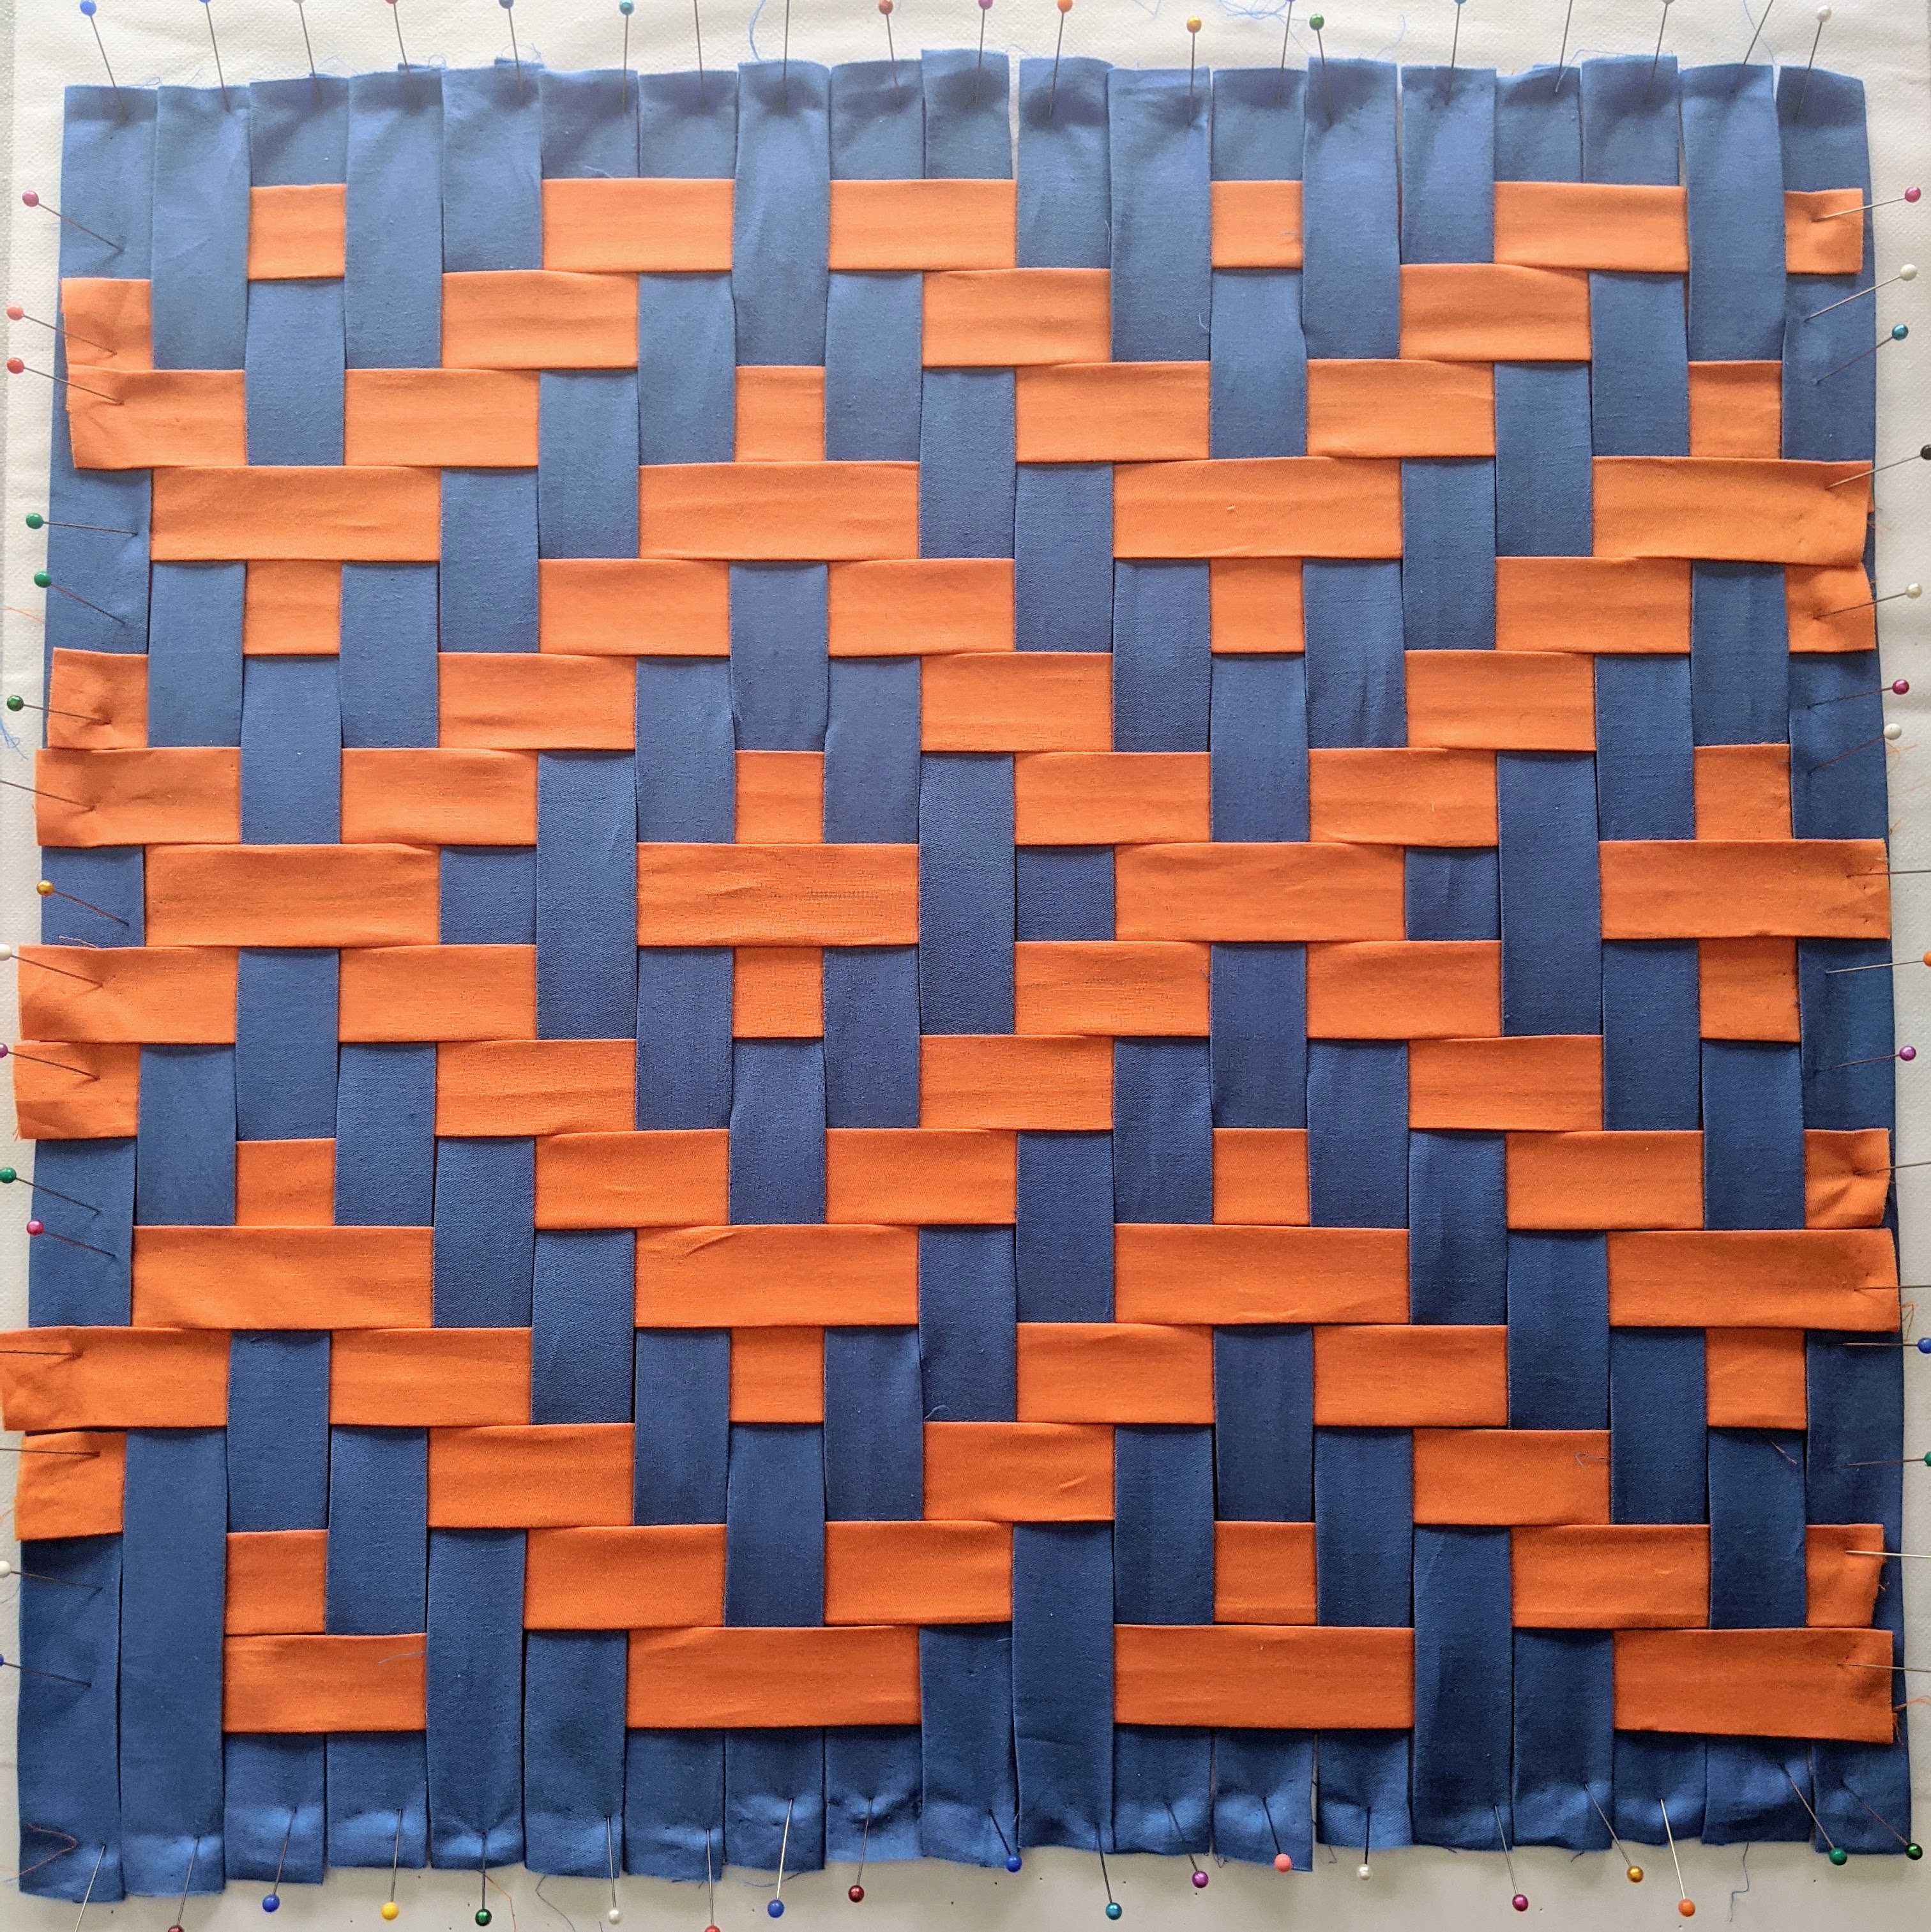 Paper Weaving Strips, Weaving Crafts for Kids